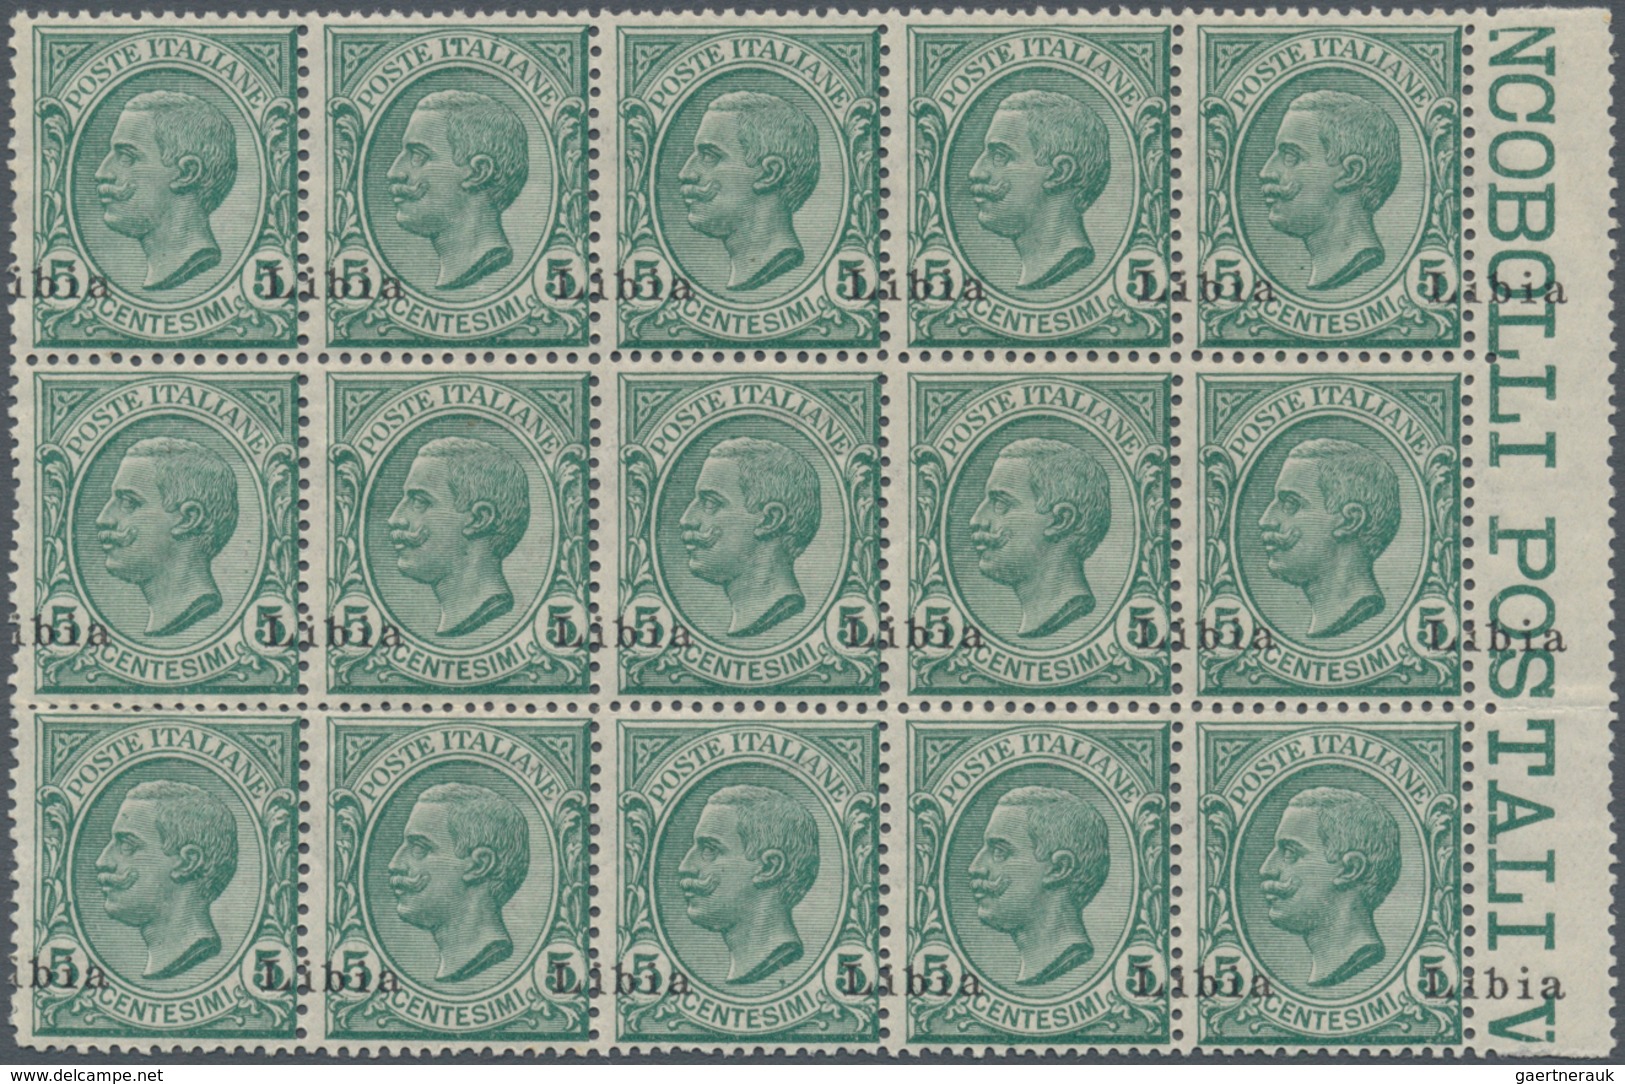 01059 Italienisch-Libyen: 1912/1915: 5 Green Cents With Overprint "Libia" Heavy Shifted To The Top And Rig - Libya